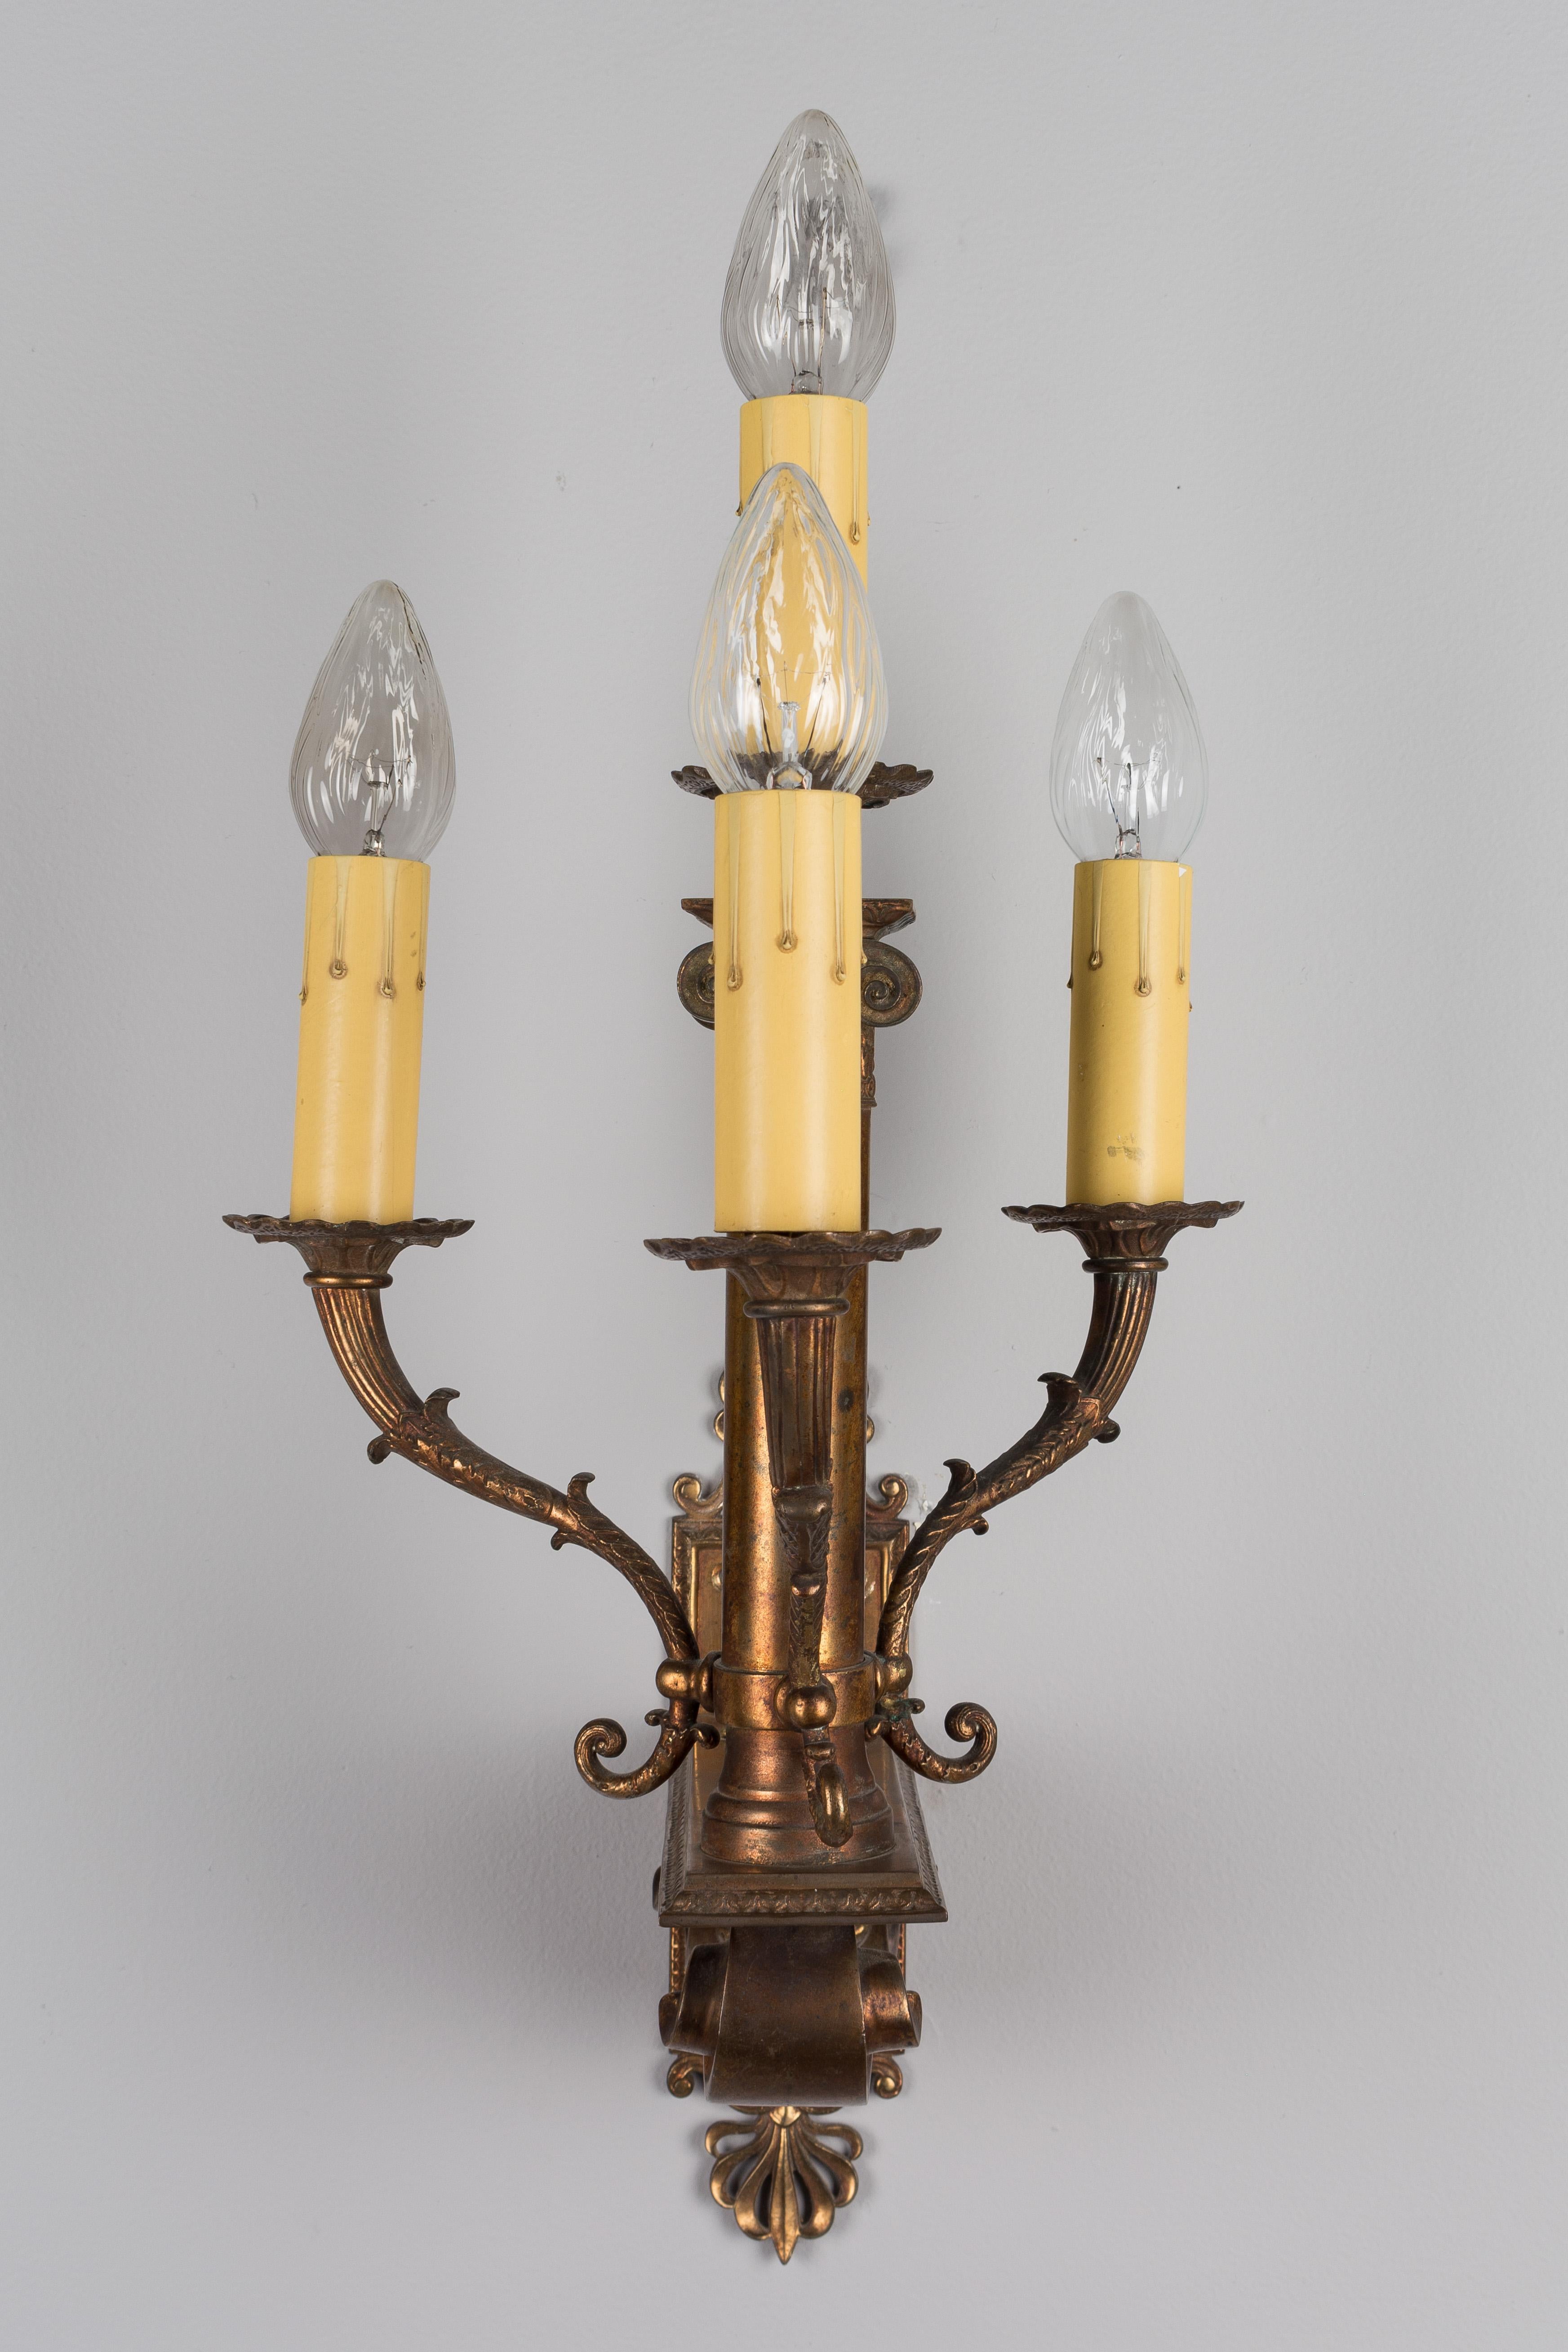 A pair of French neoclassical style four-light brass sconces with copper patina. Central ionic column with three arms all resting on large plinth with scroll motif attached to a rectangular backplate. Wired, but  should be checked by an electrician.